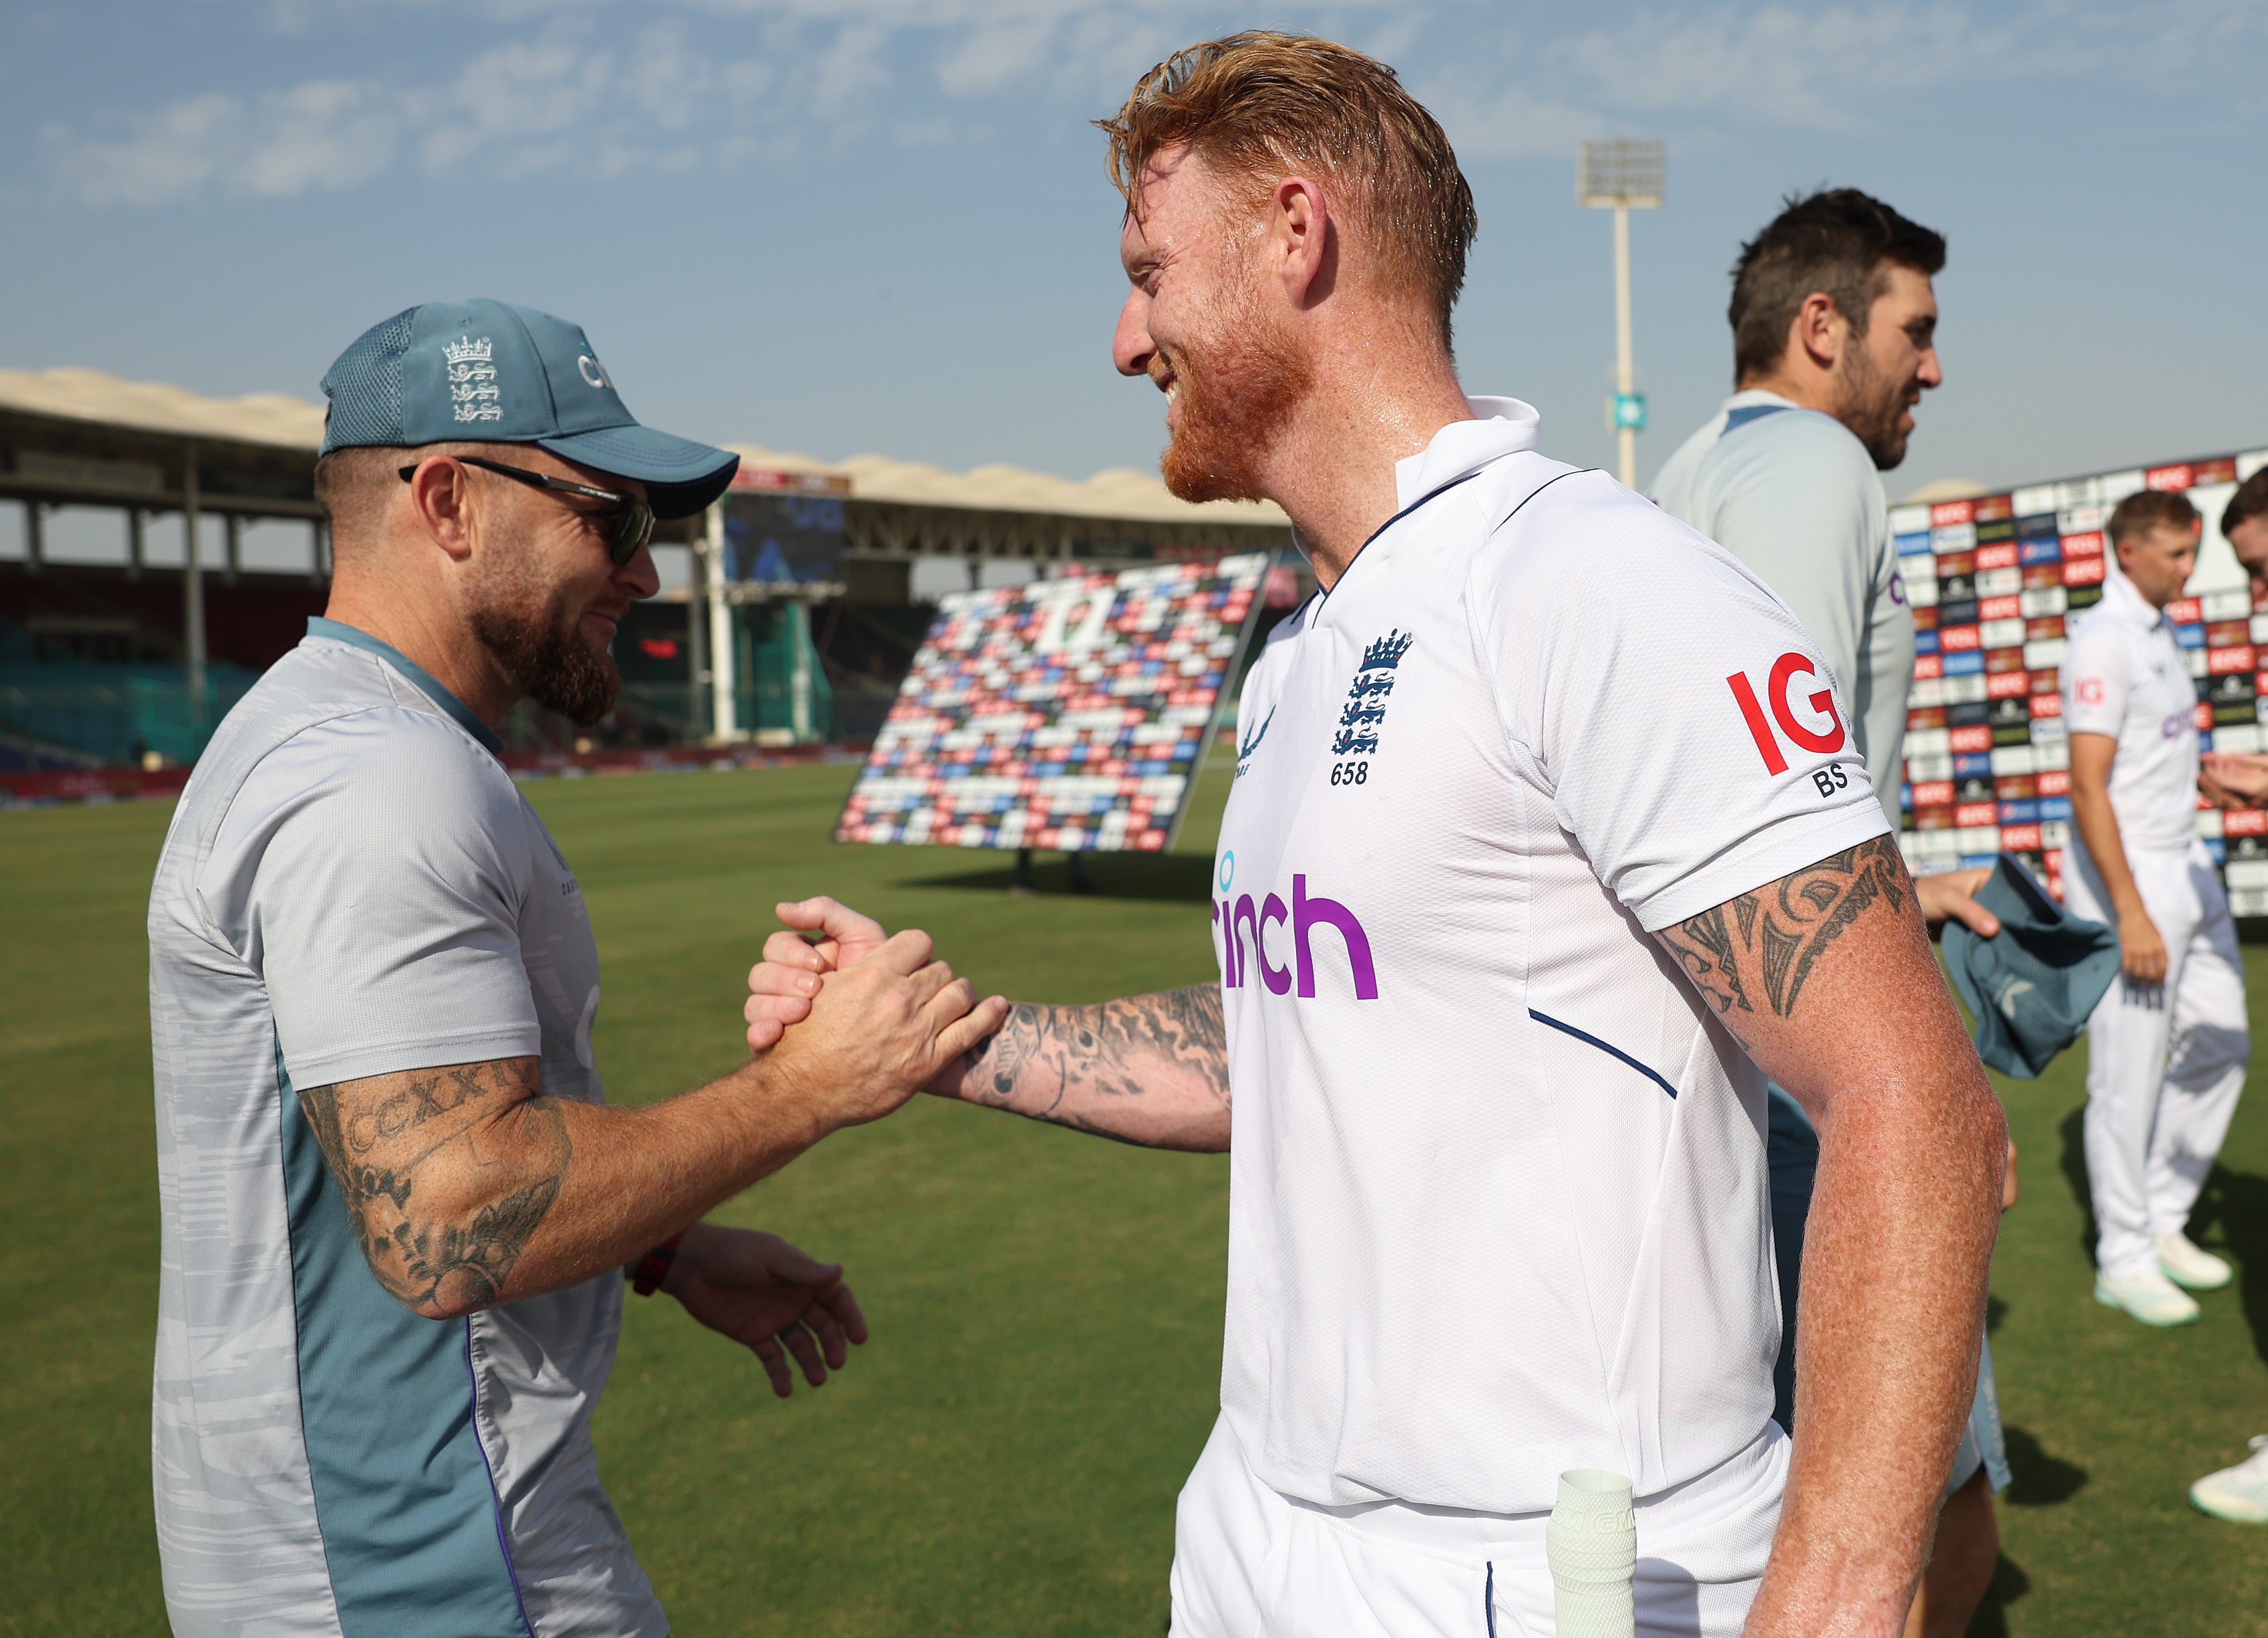 Stokes and McCullum have transformed England’s fortunes in the last 15 months